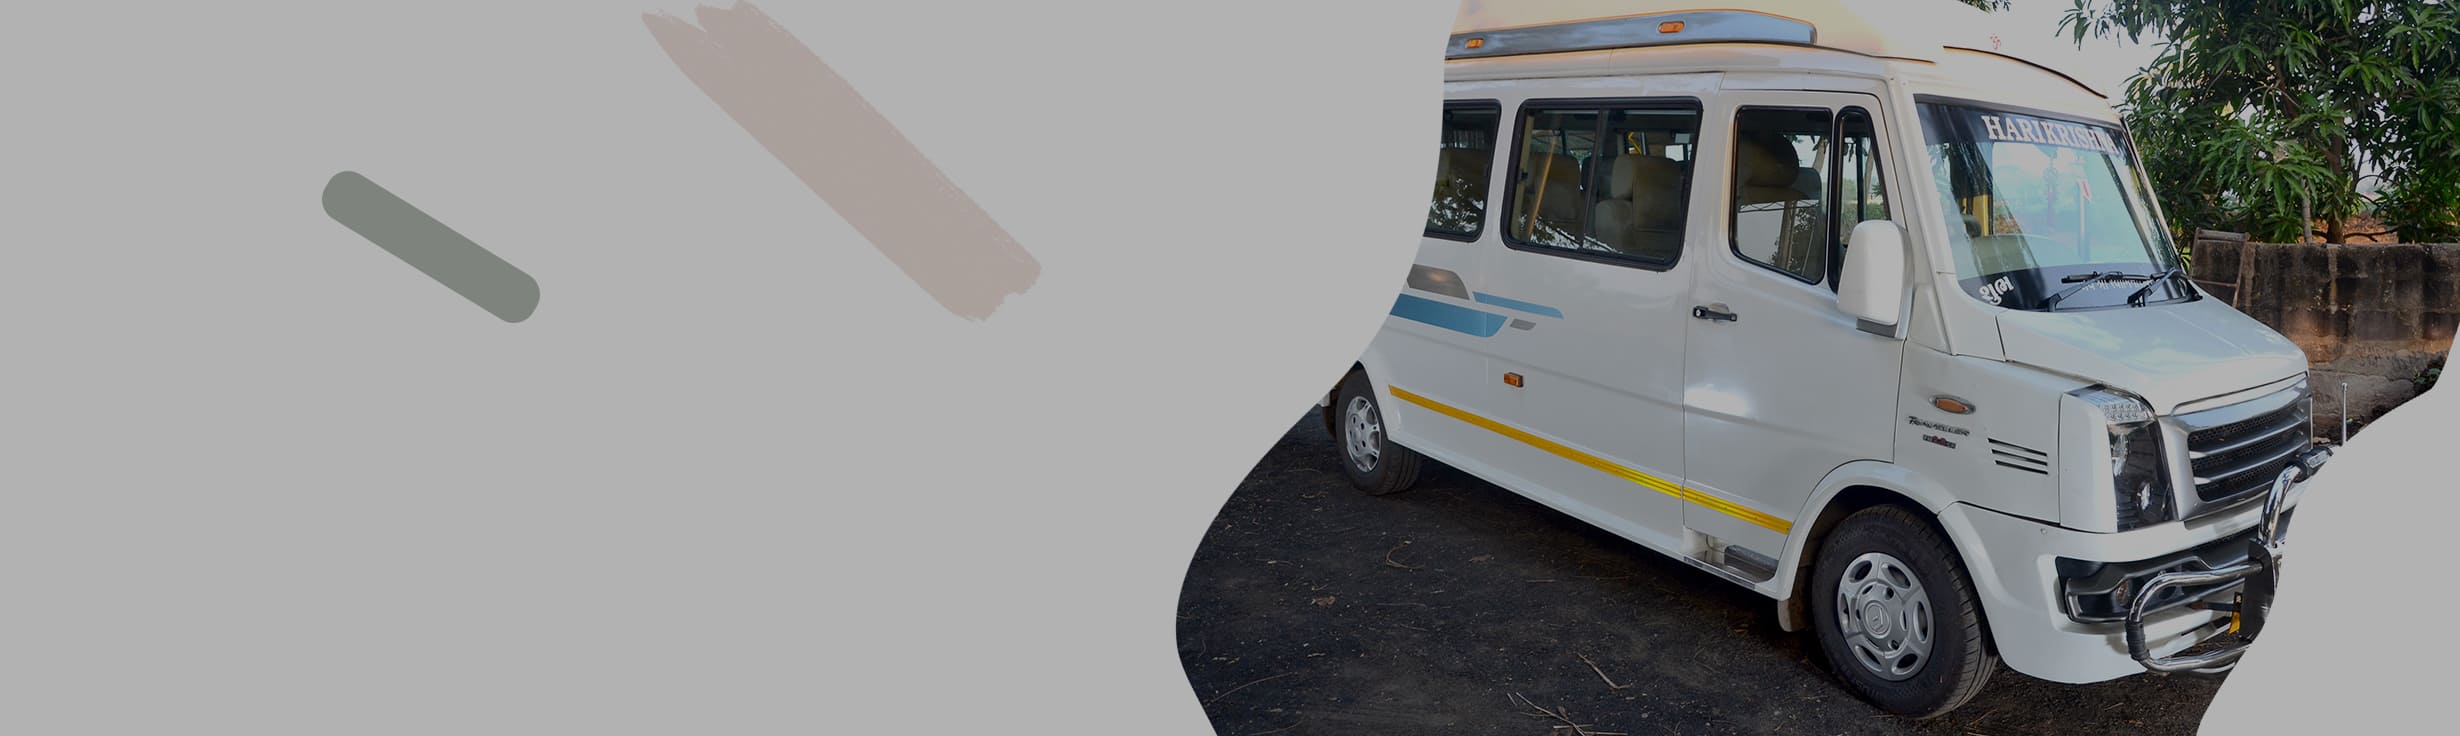 15 Seater tempo Traveller Hire